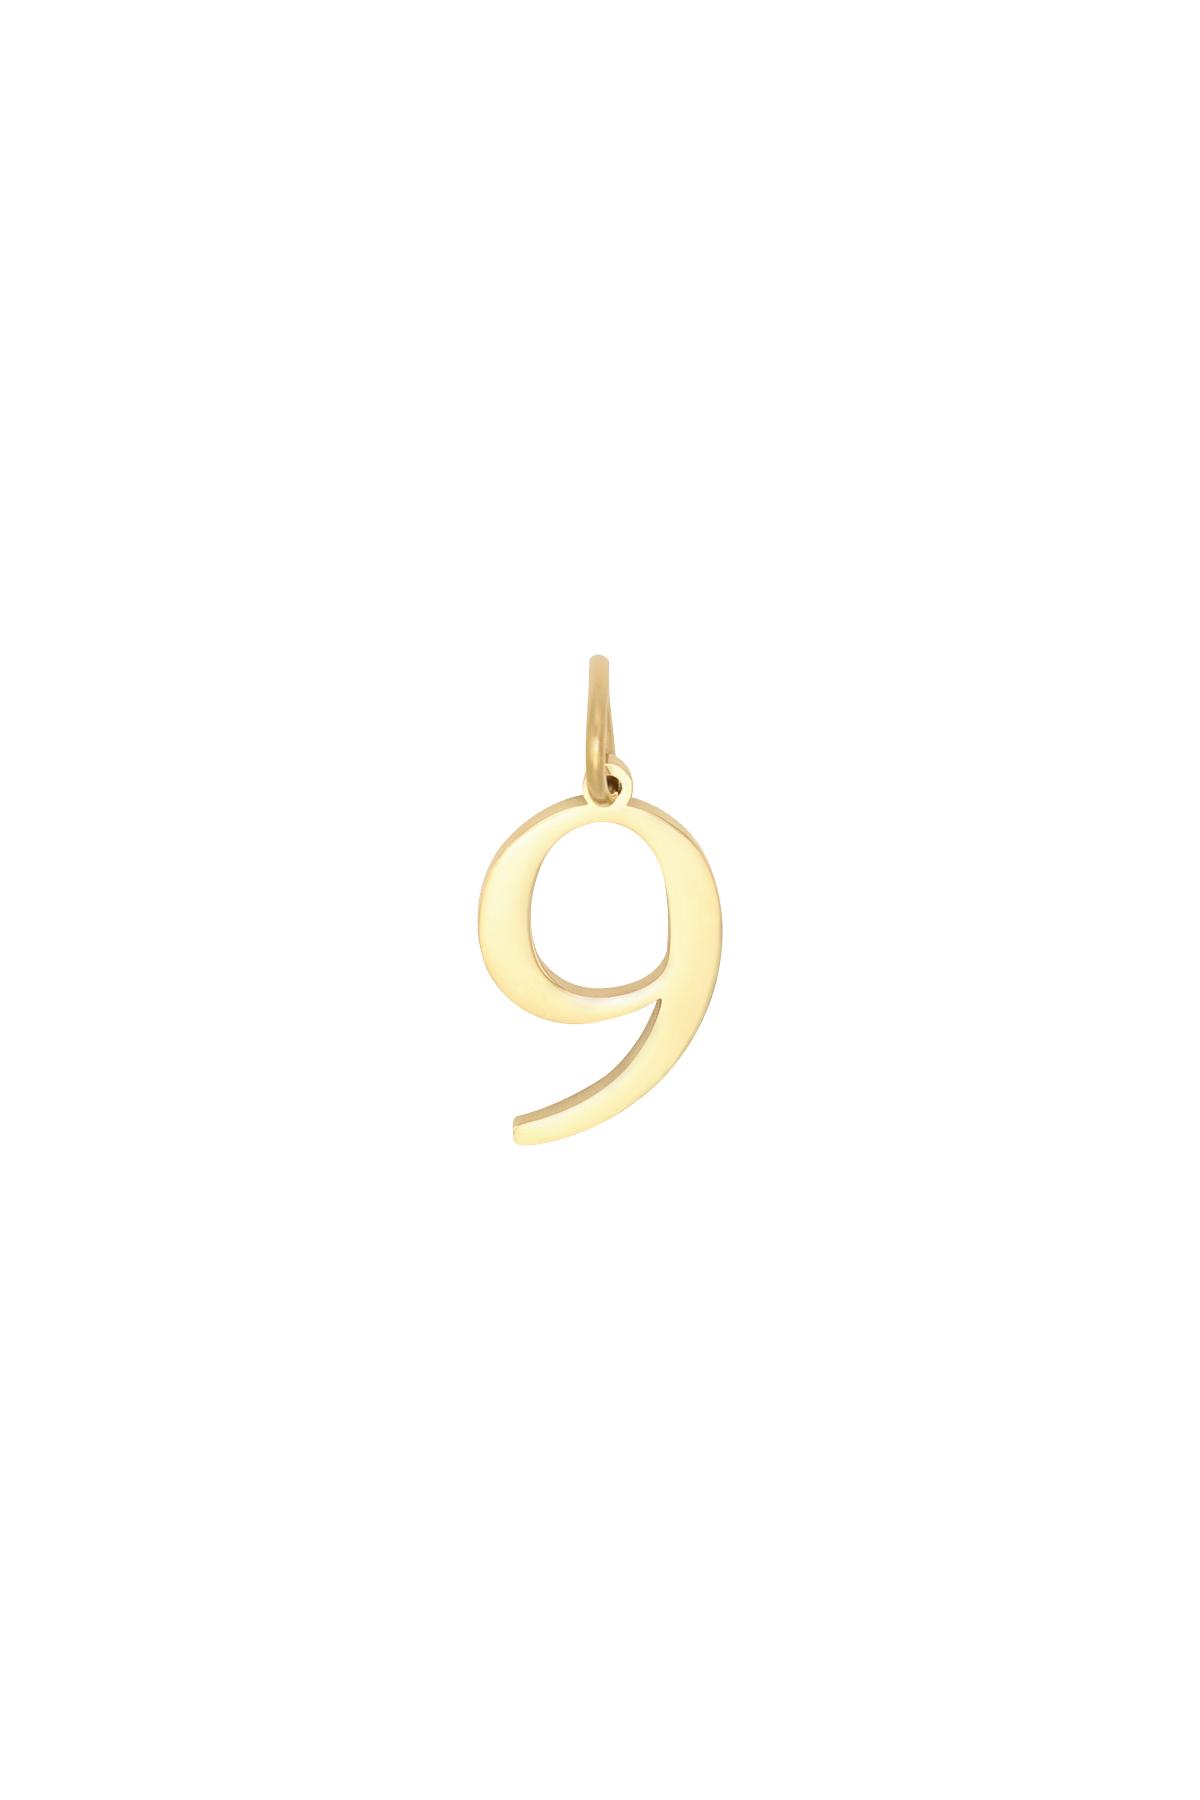 Gold / DIY Charm Digits Gold - 9 Stainless Steel Picture14